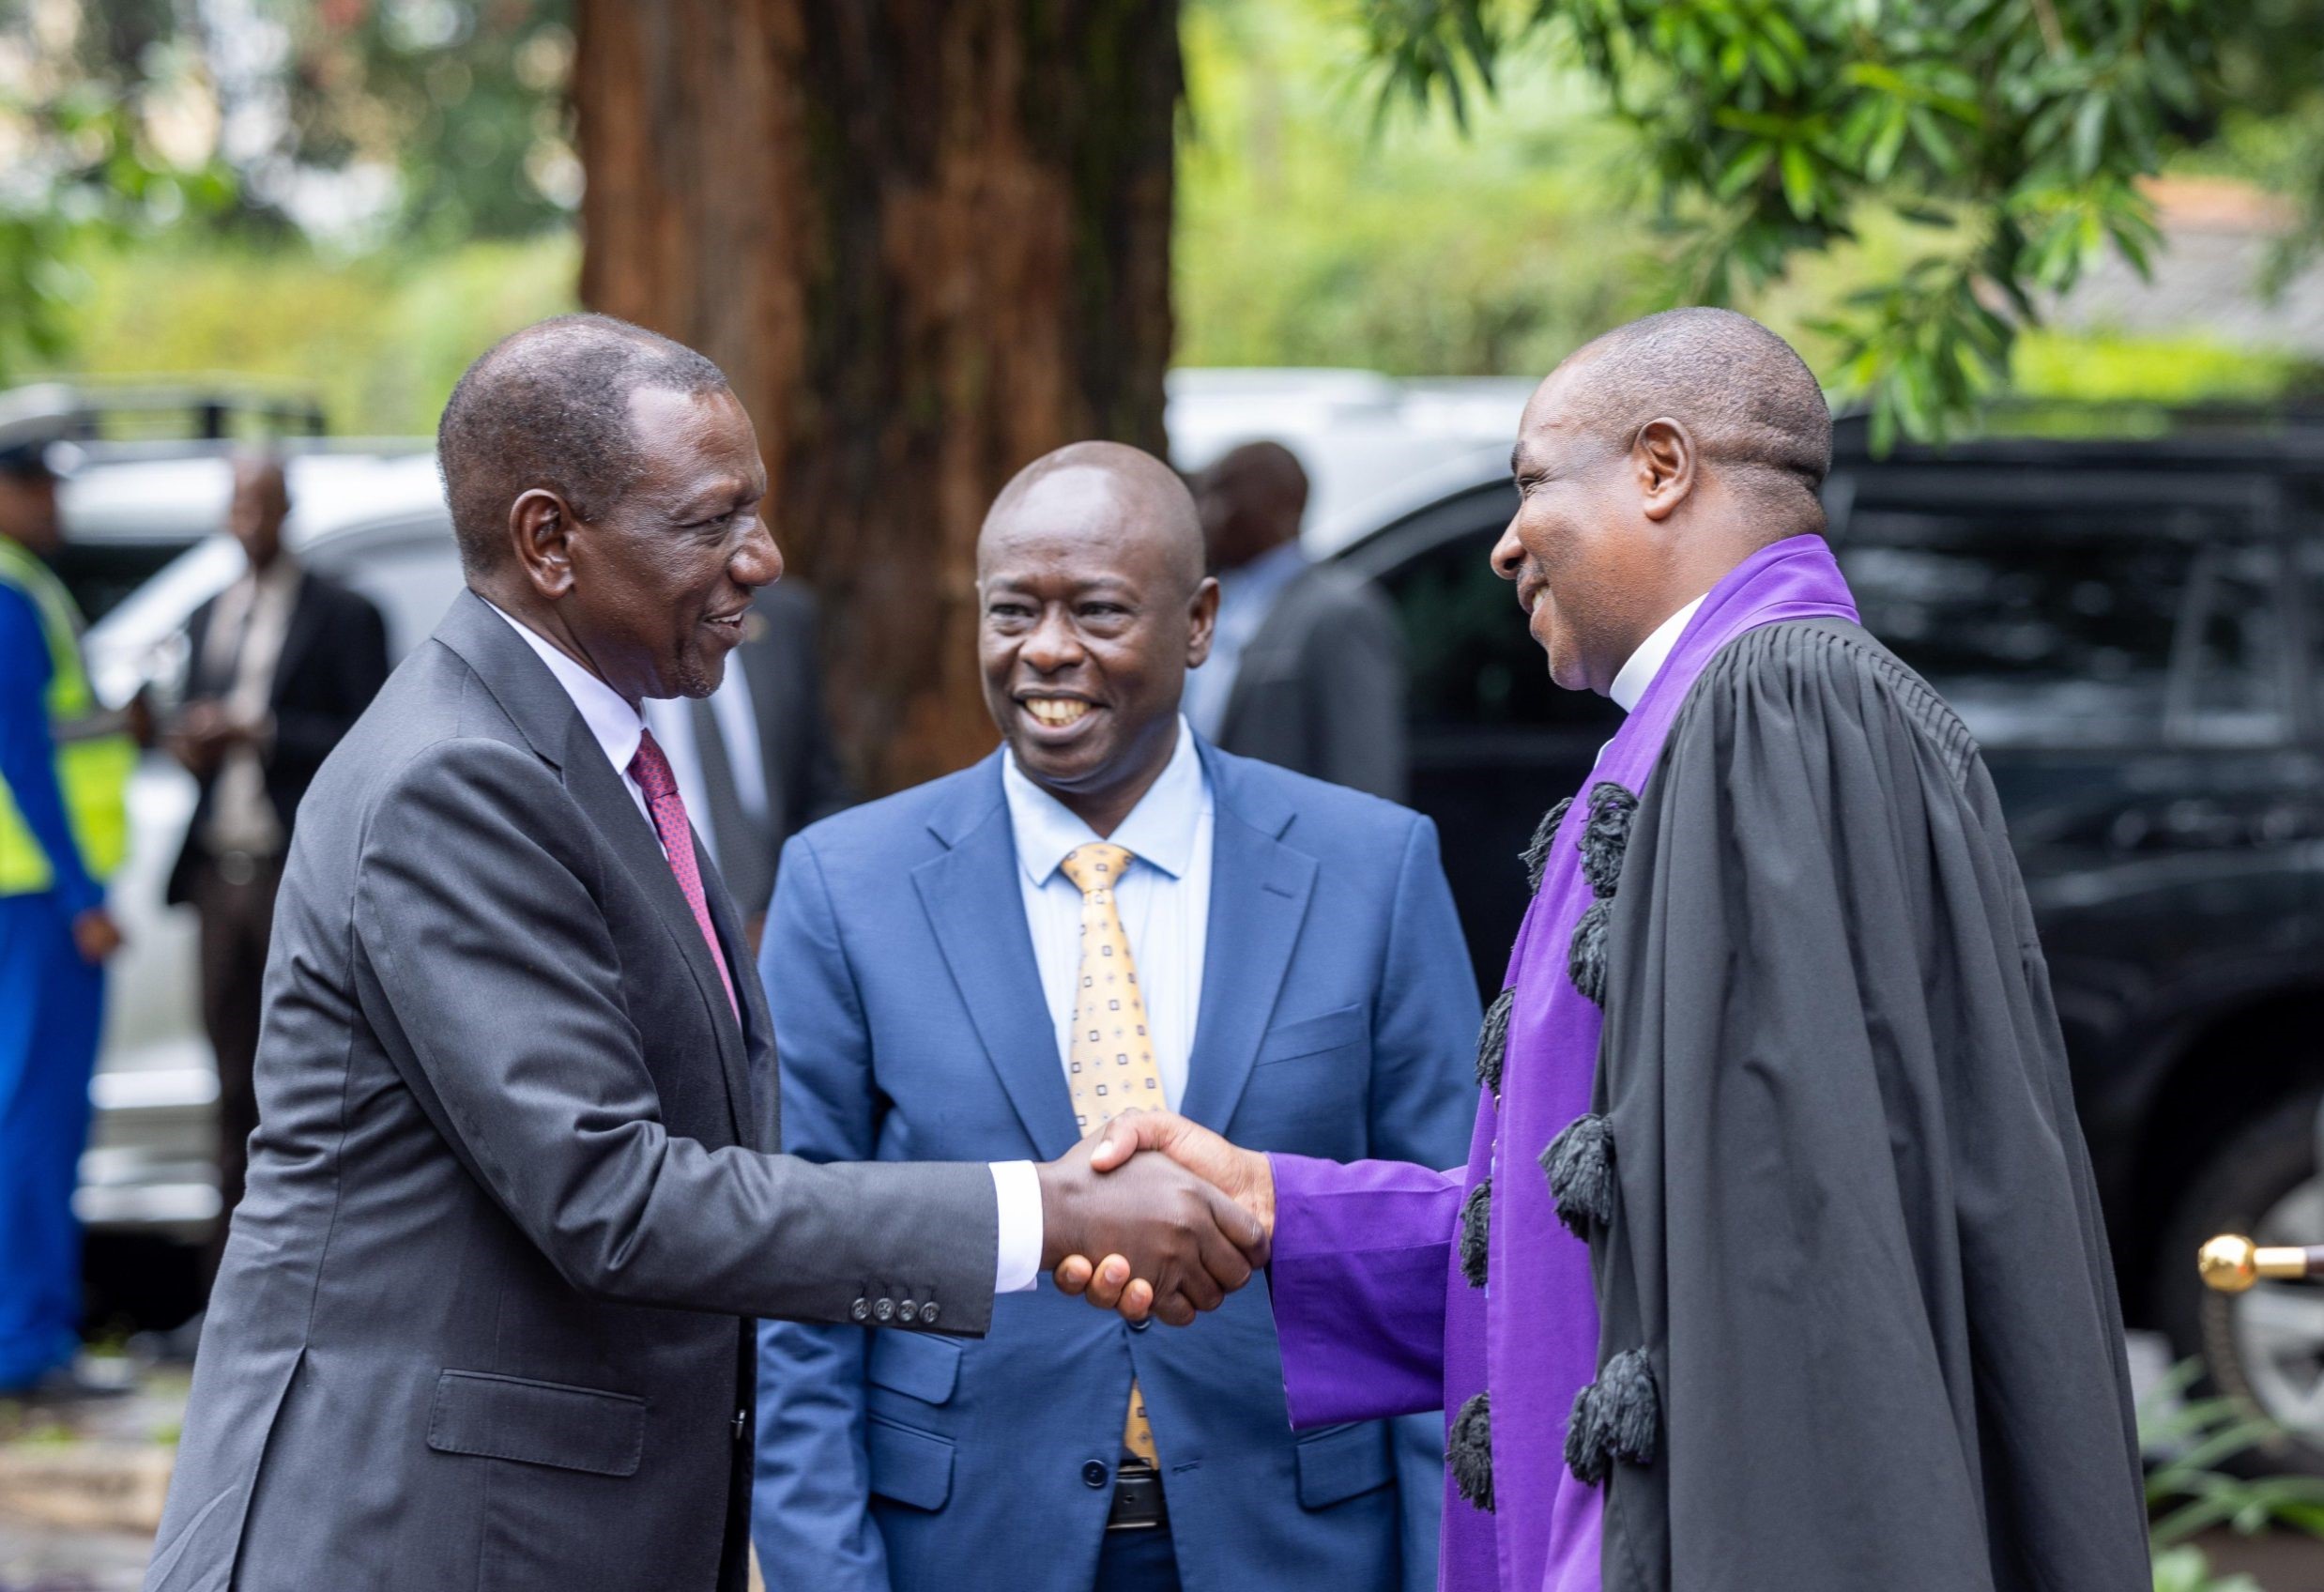 President Ruto, Church Leaders Join Forces to Combat Social Issues in Kenya